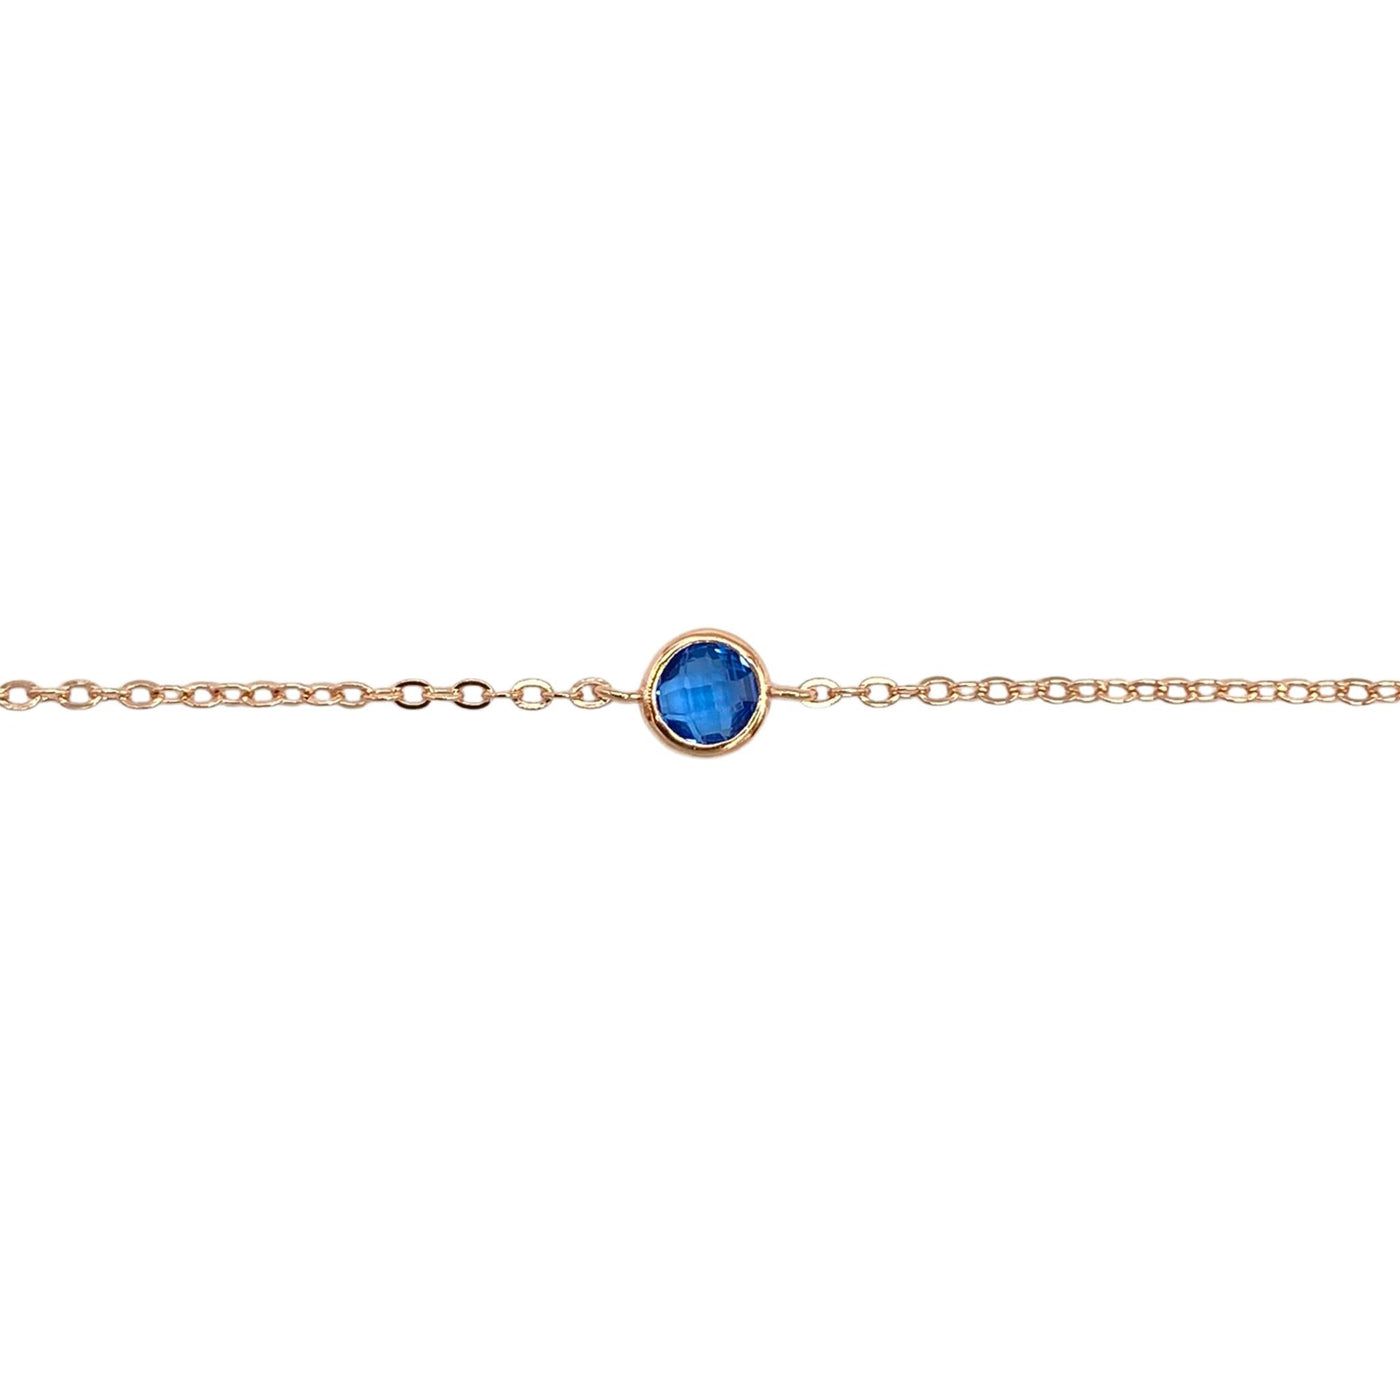 Silver anklet with connector - rose plated